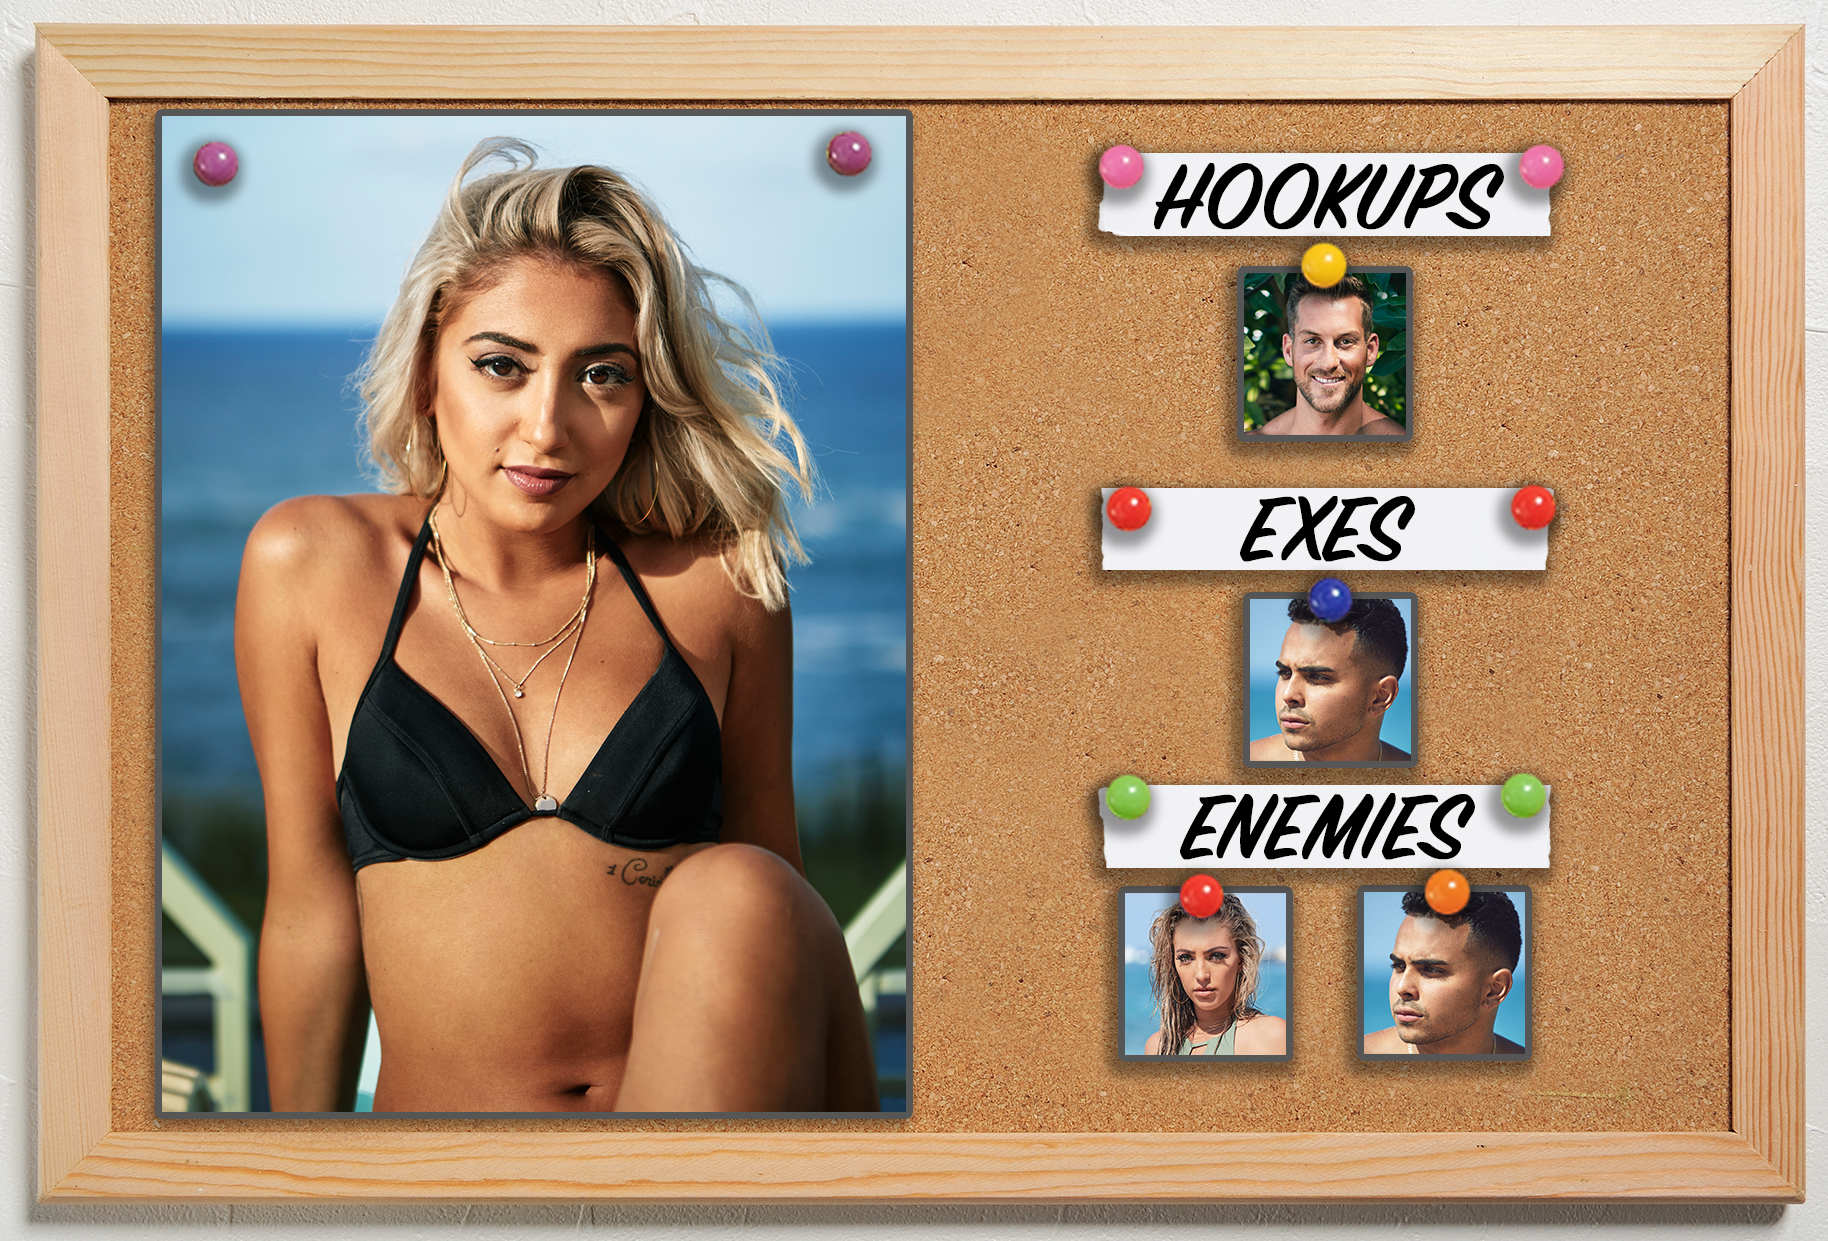 Beach Incest Porn - Ex on the Beach Relationships: Who's Hooked up With Who?